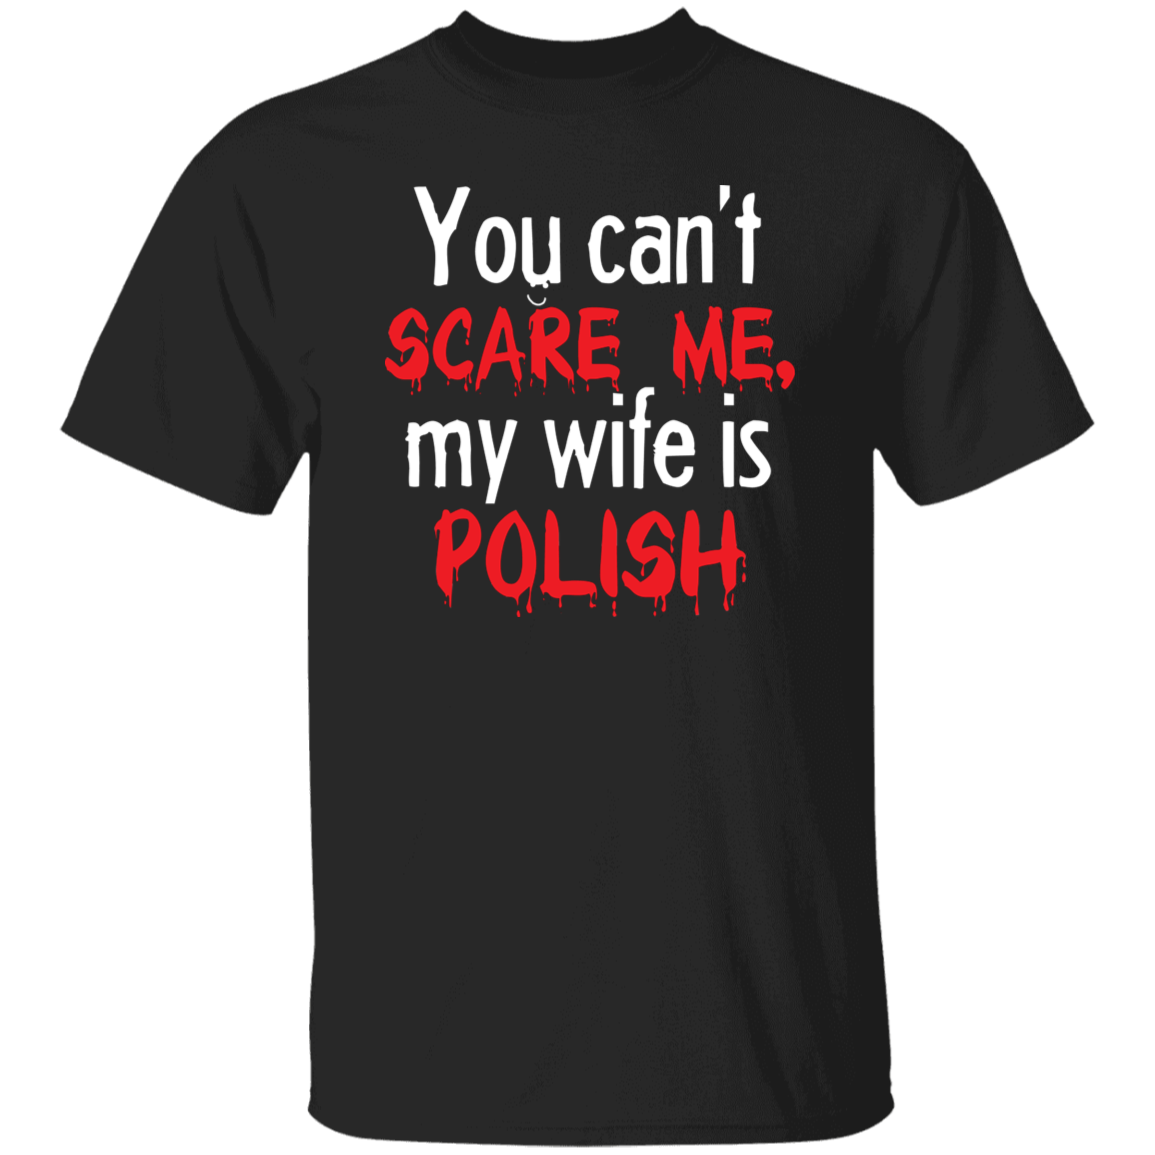 You Can't Scare Me My Wife Is Polish Apparel CustomCat G500 5.3 oz. T-Shirt Black S